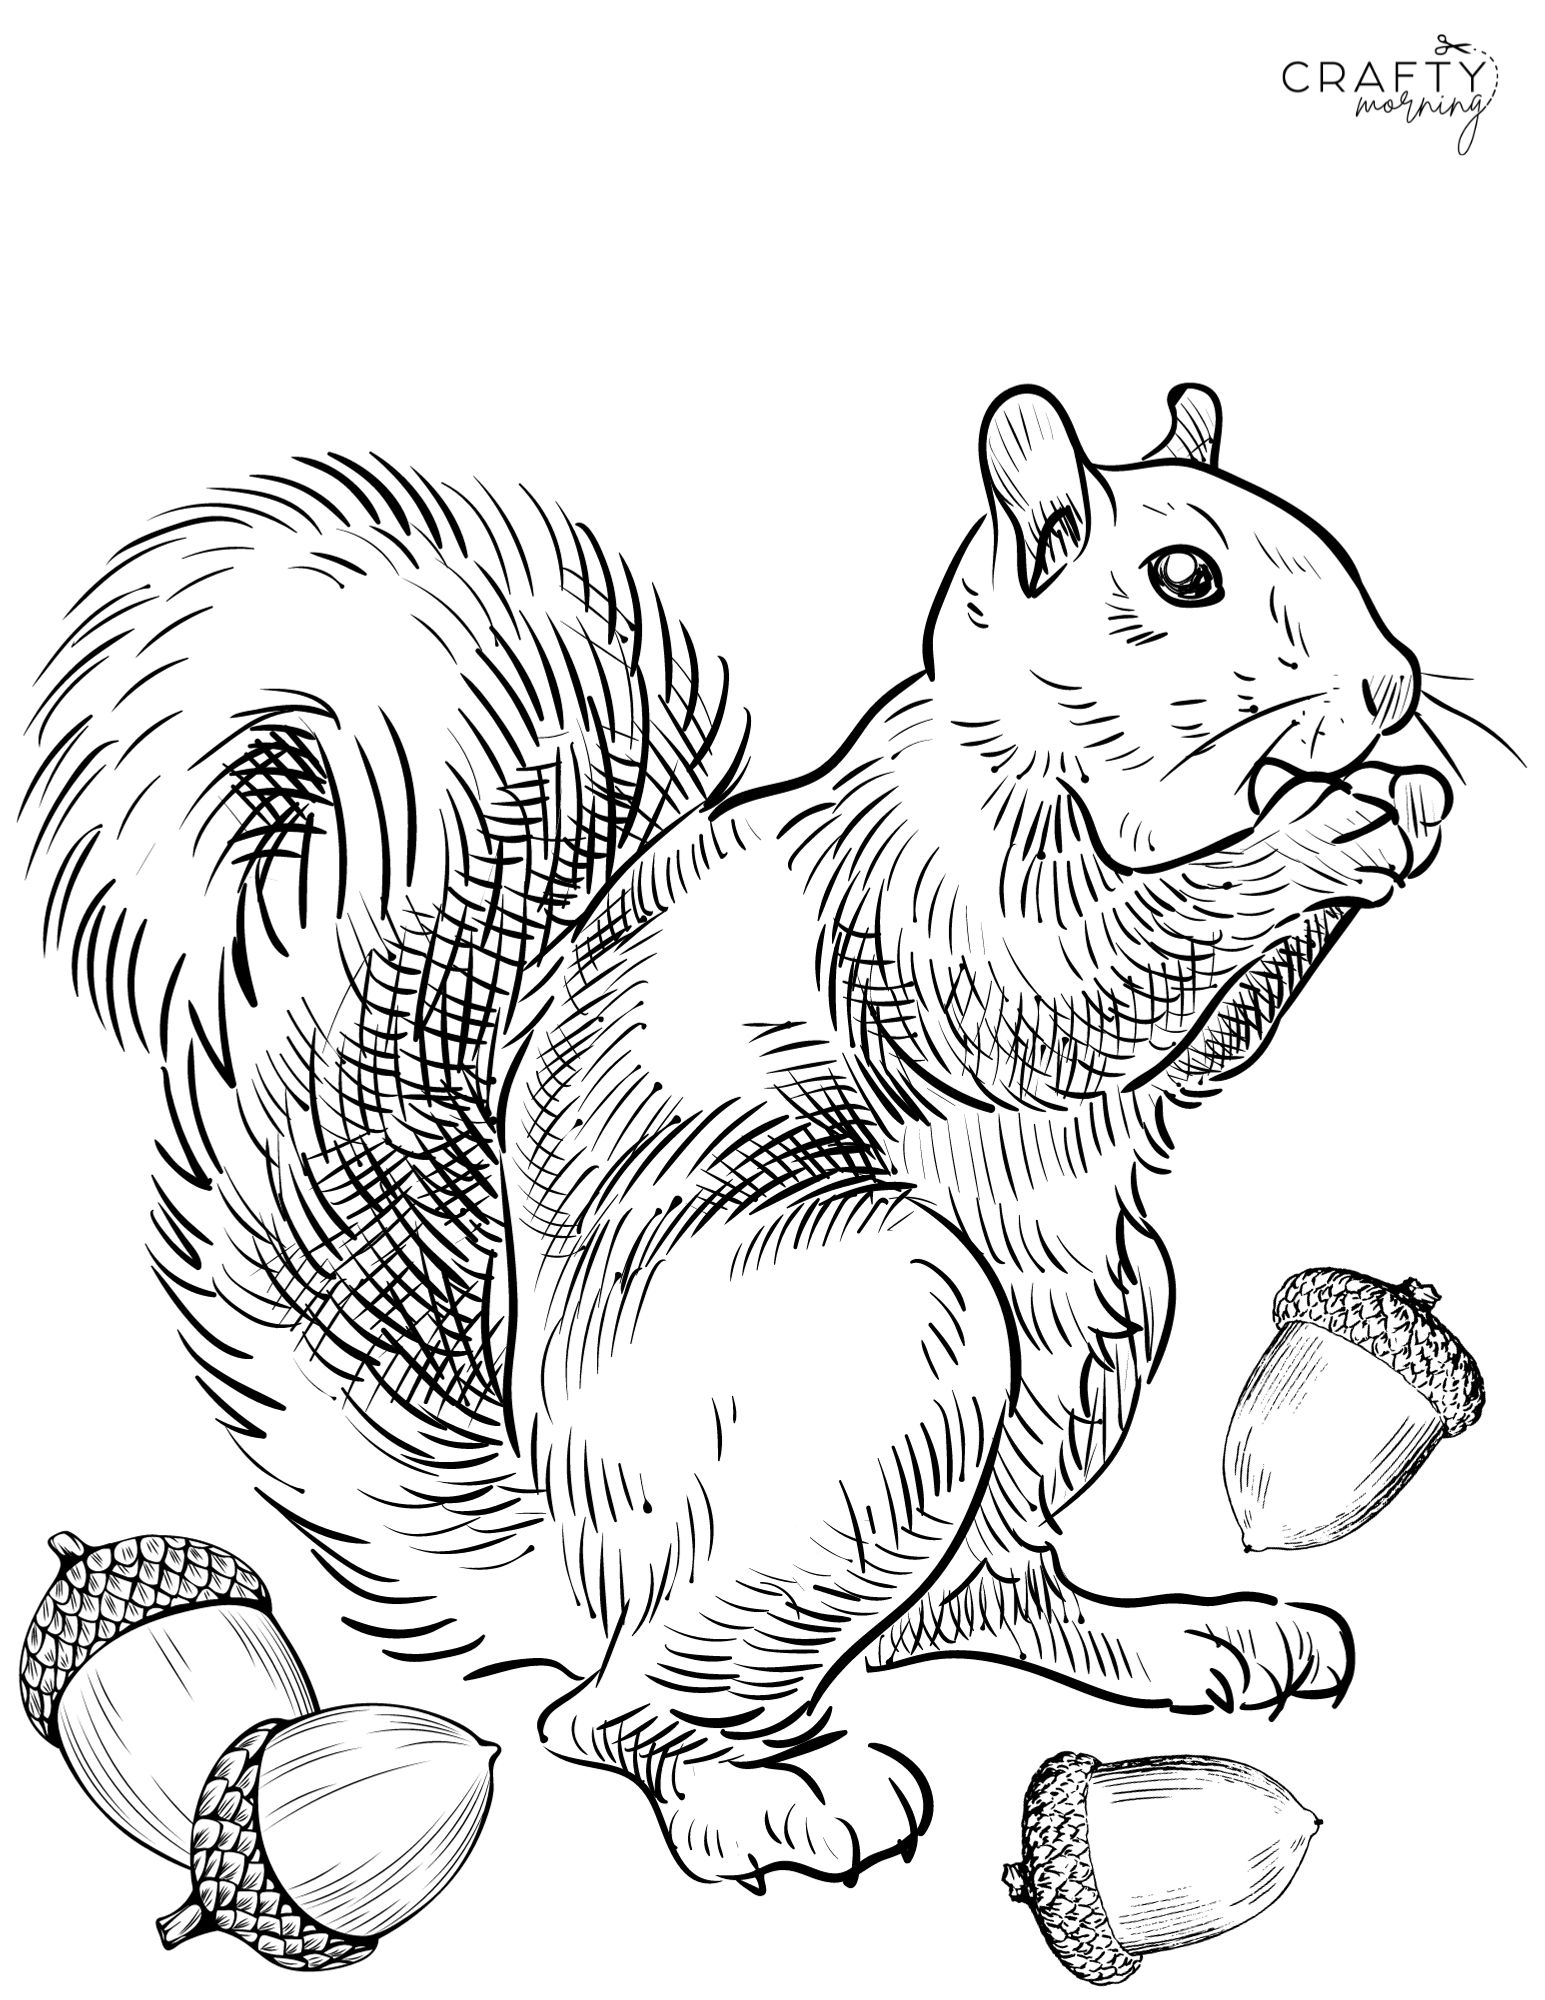 Squirrel coloring pages to print